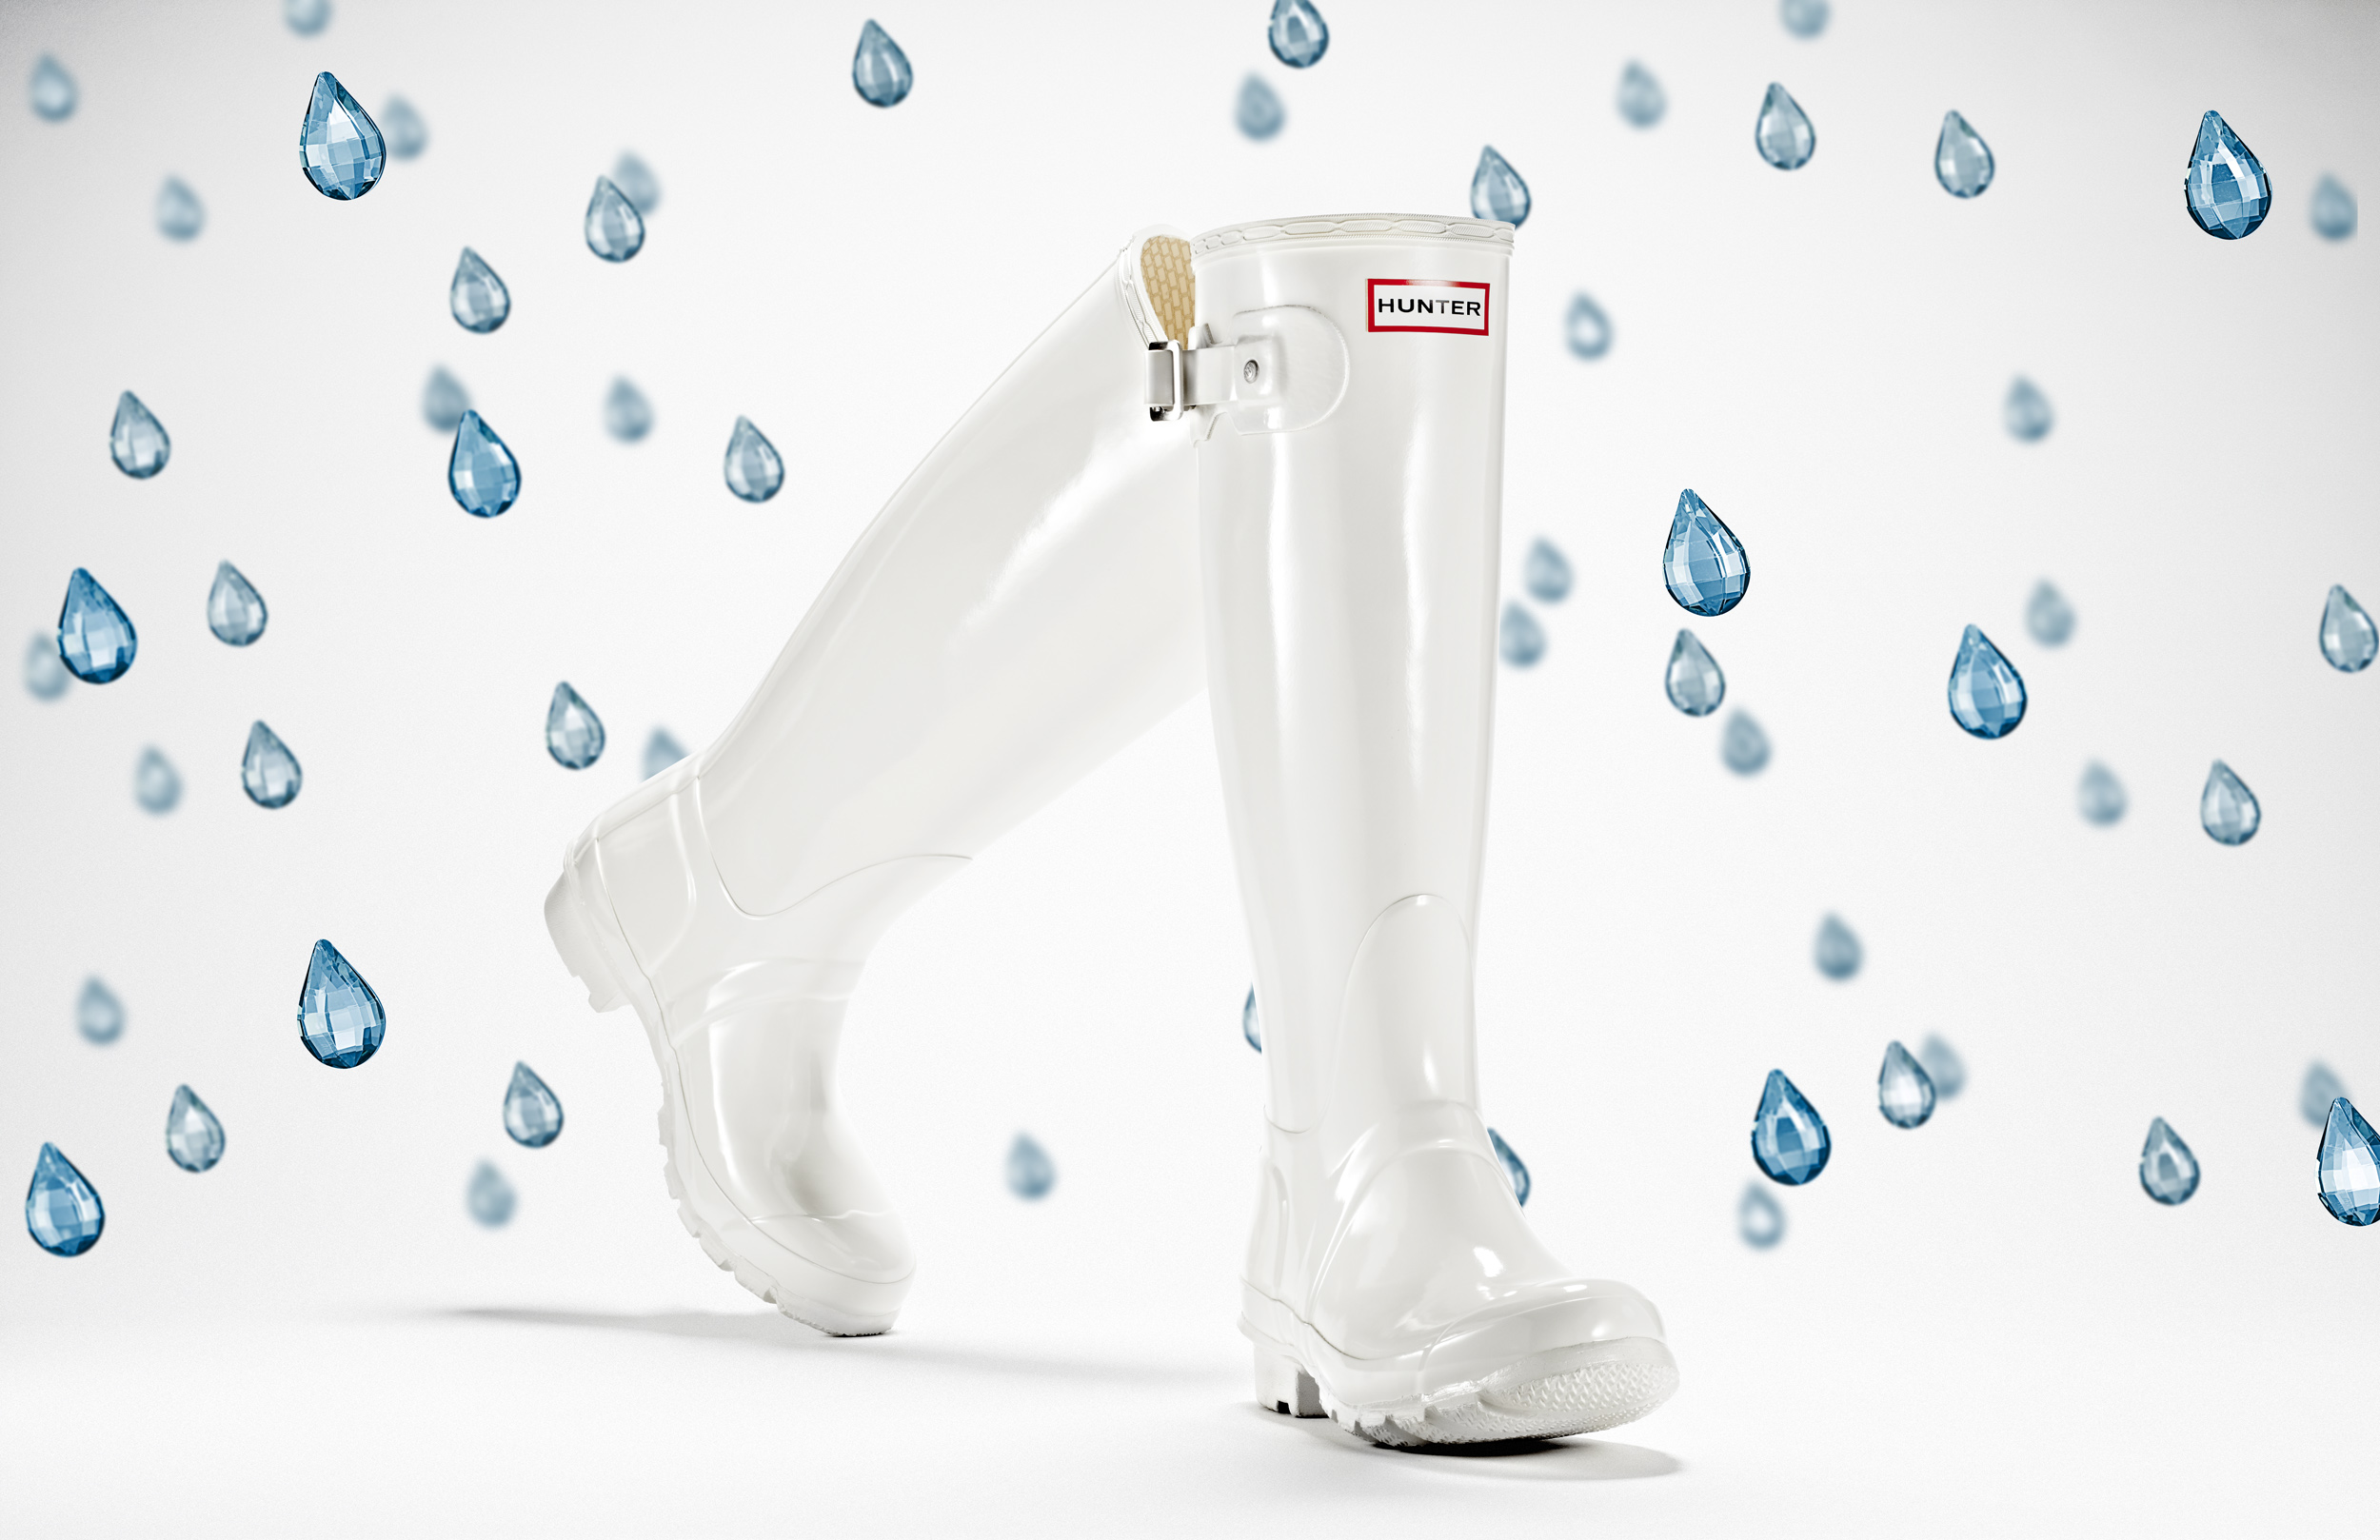 advertising still life photograph of white hunter boots surrounded by blue jewel raindrops